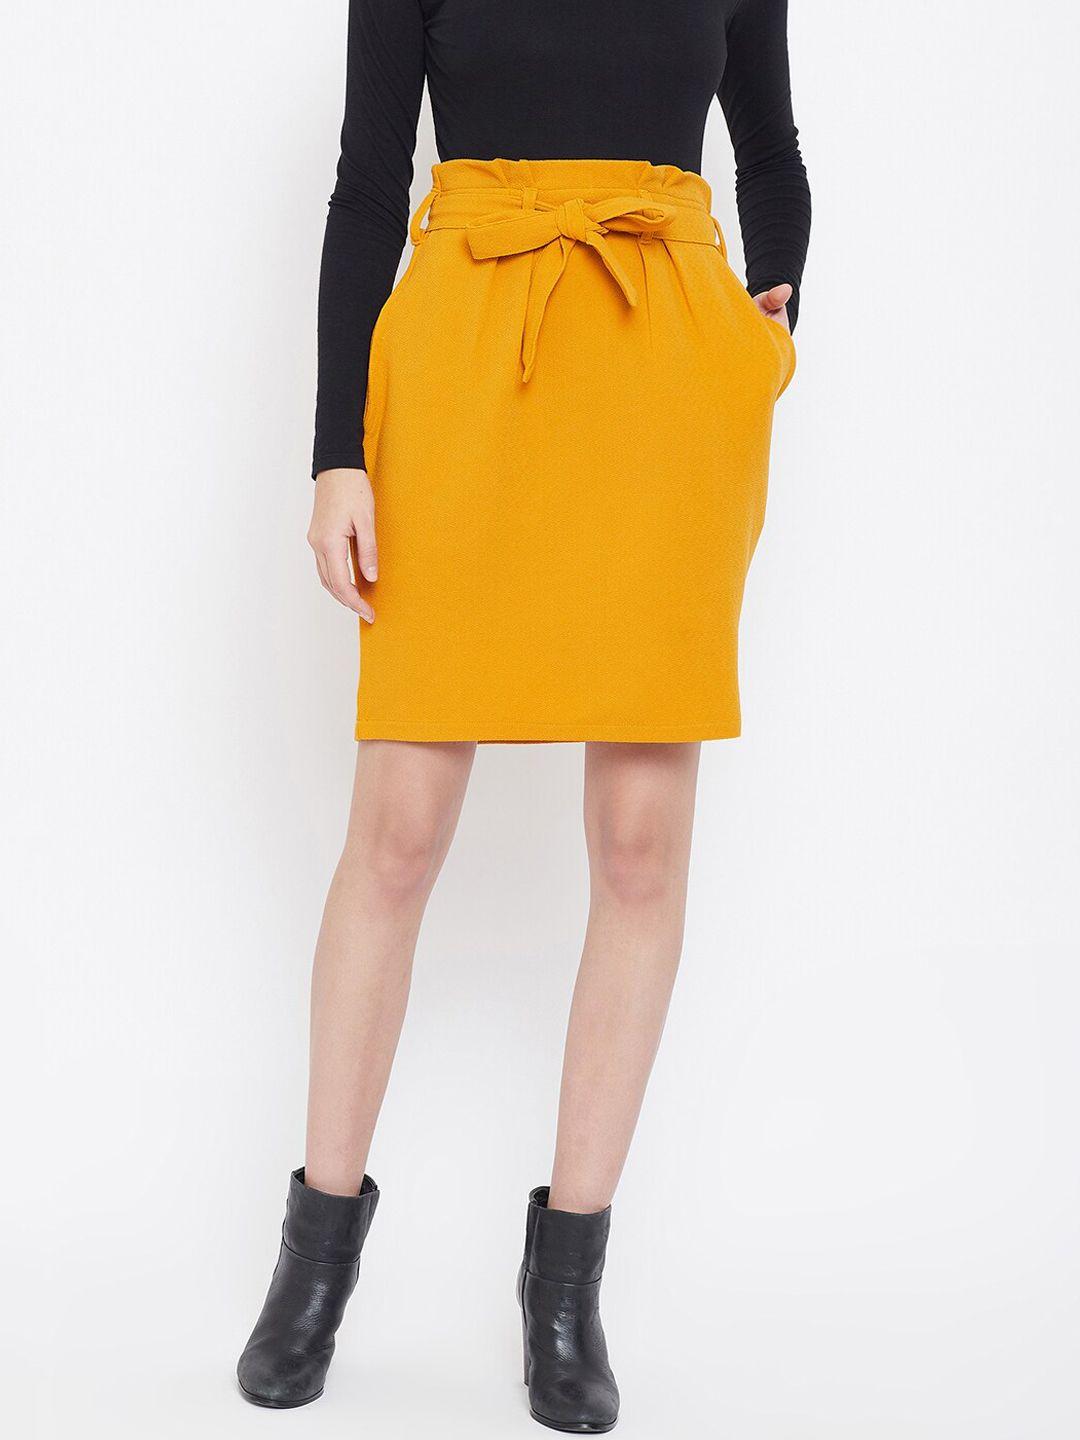 zastraa-women-mustard-yellow-solid-a-line-ankle-length-skirt-with-belt